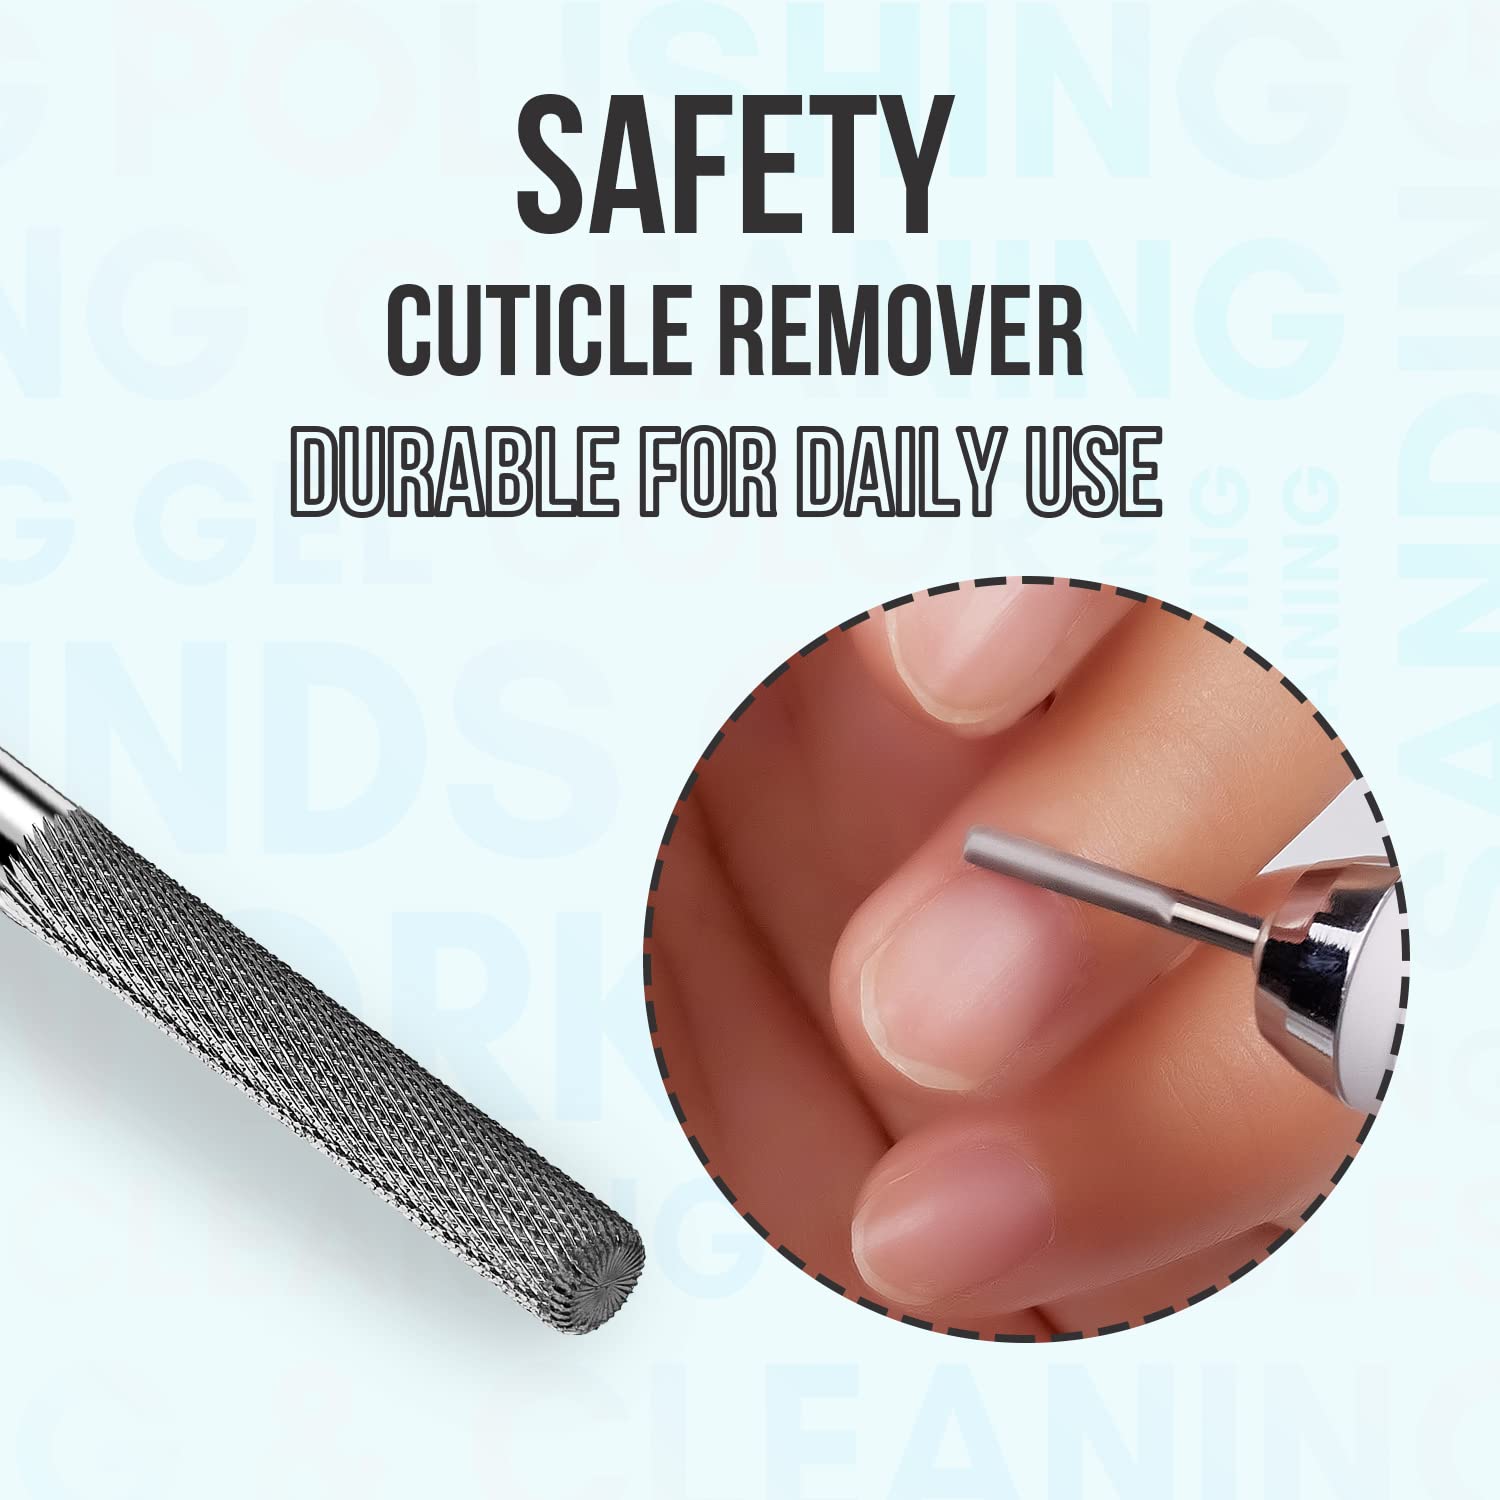 Easy Bit (Cuticle Nail Drill Bit, Safety Carbide Cuticle Remover Drill Bit Under Nail Cleaner Dead Skin Nail Prepare 3/32" For Electric Nail File Nail Buffer Bit-3XF)